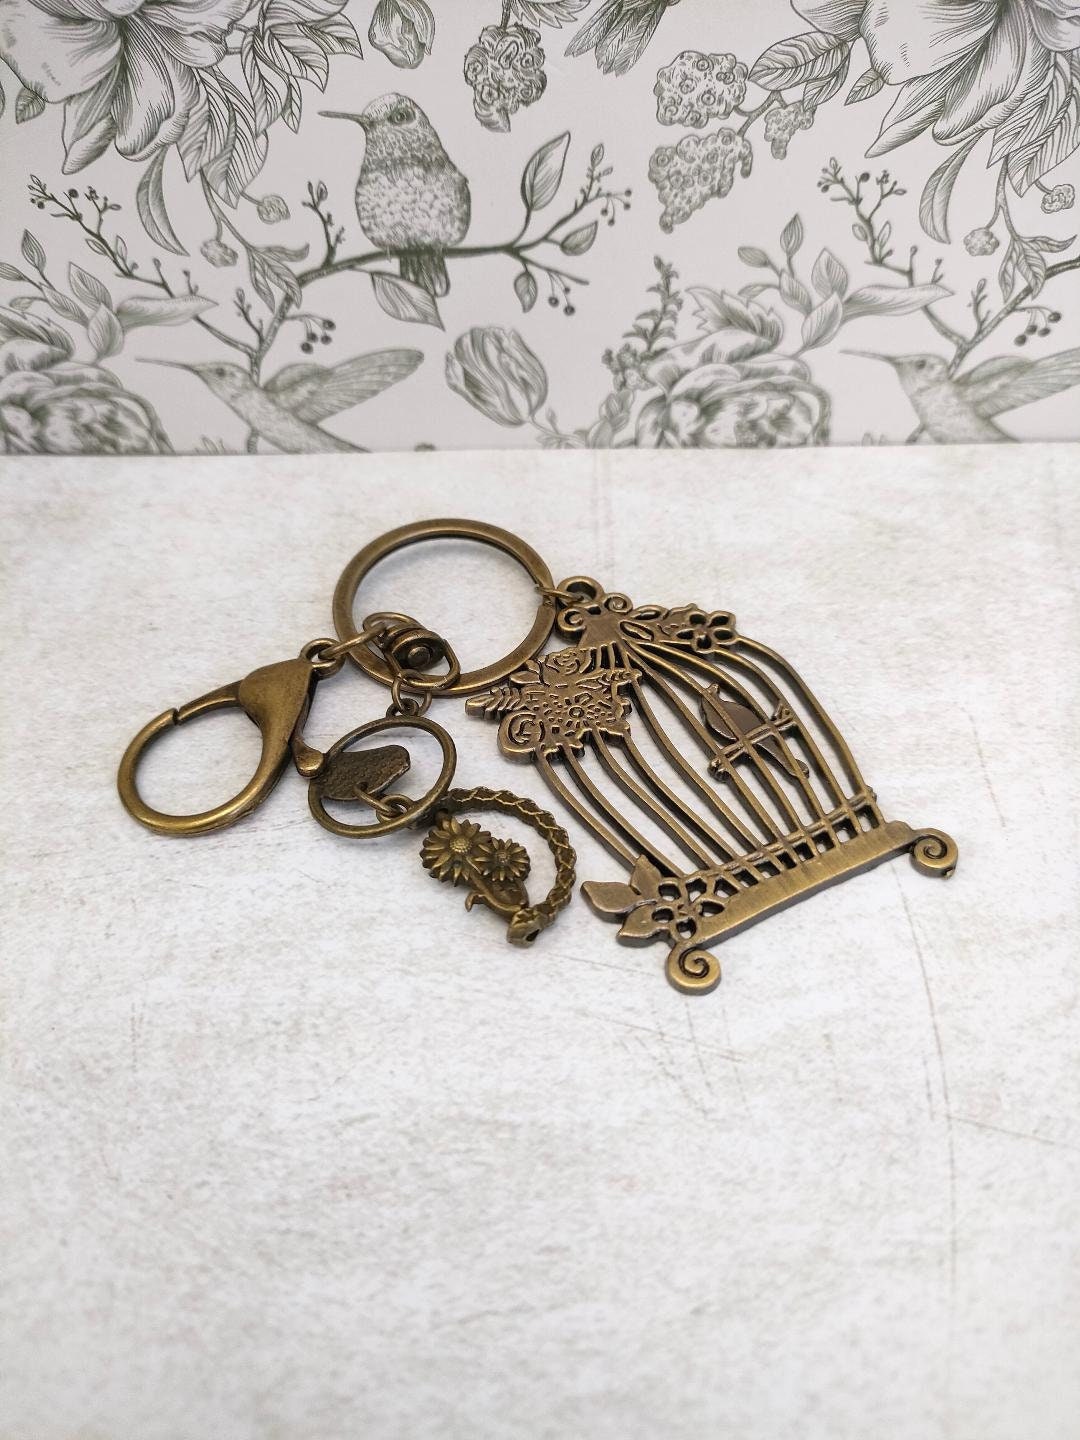 Birdcage Antique Bronze Tibetan Style keyring, Bird themed Key Chains, Gift for Animal Lovers, Bag Accessories and Gfits